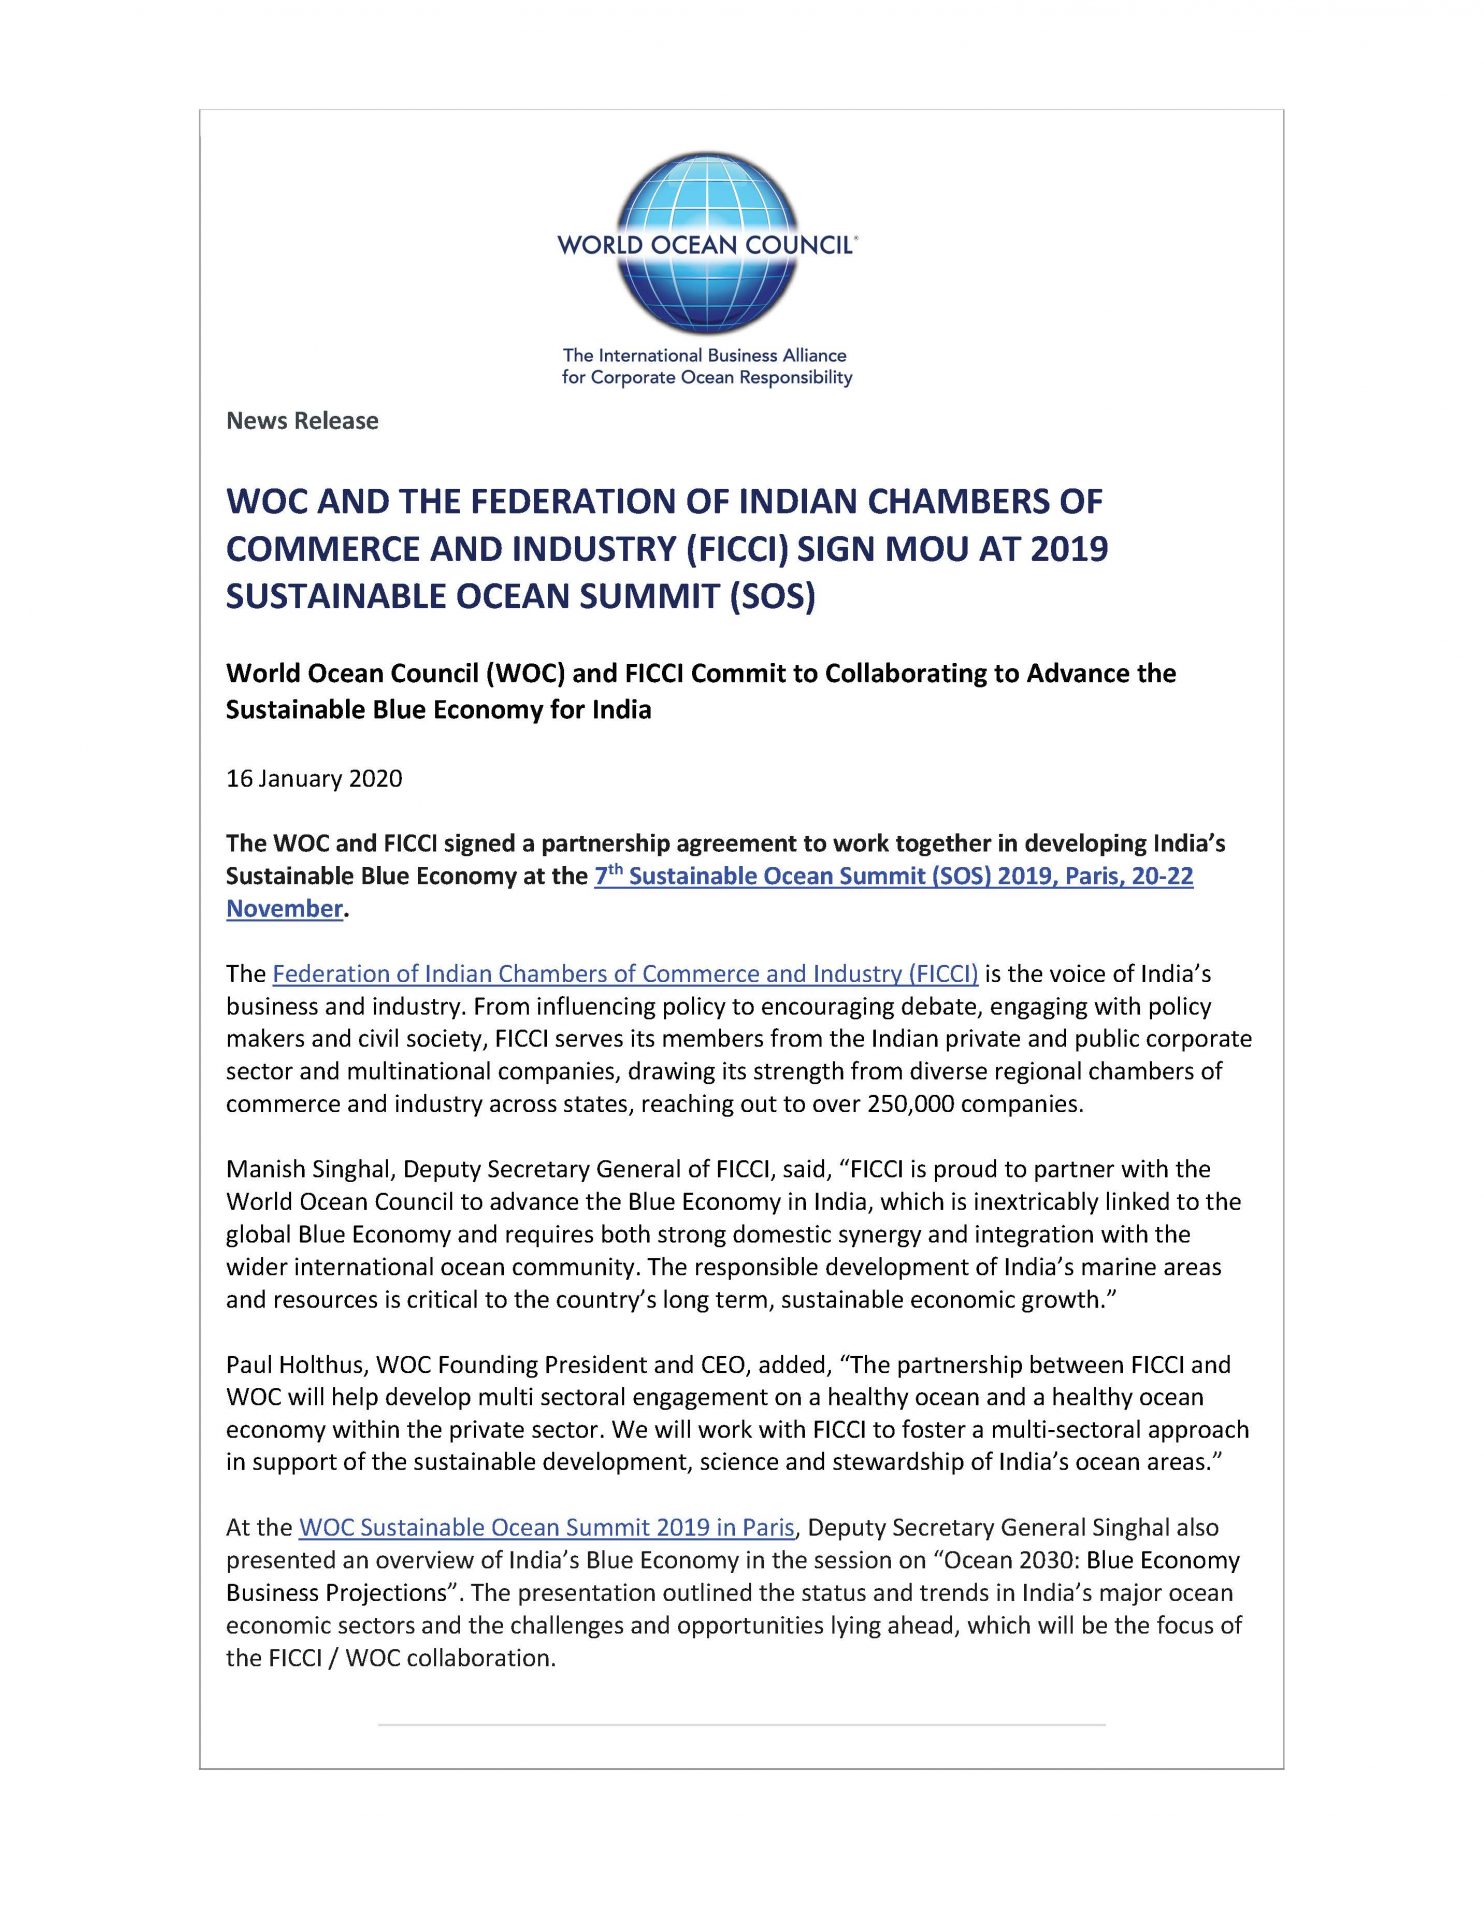 WOC and the Federation of Indian Chambers of Commerce and Industry (FICCI) Sign MOU at 2019 Sustainable Ocean Summit (SOS) - 16 January 2020